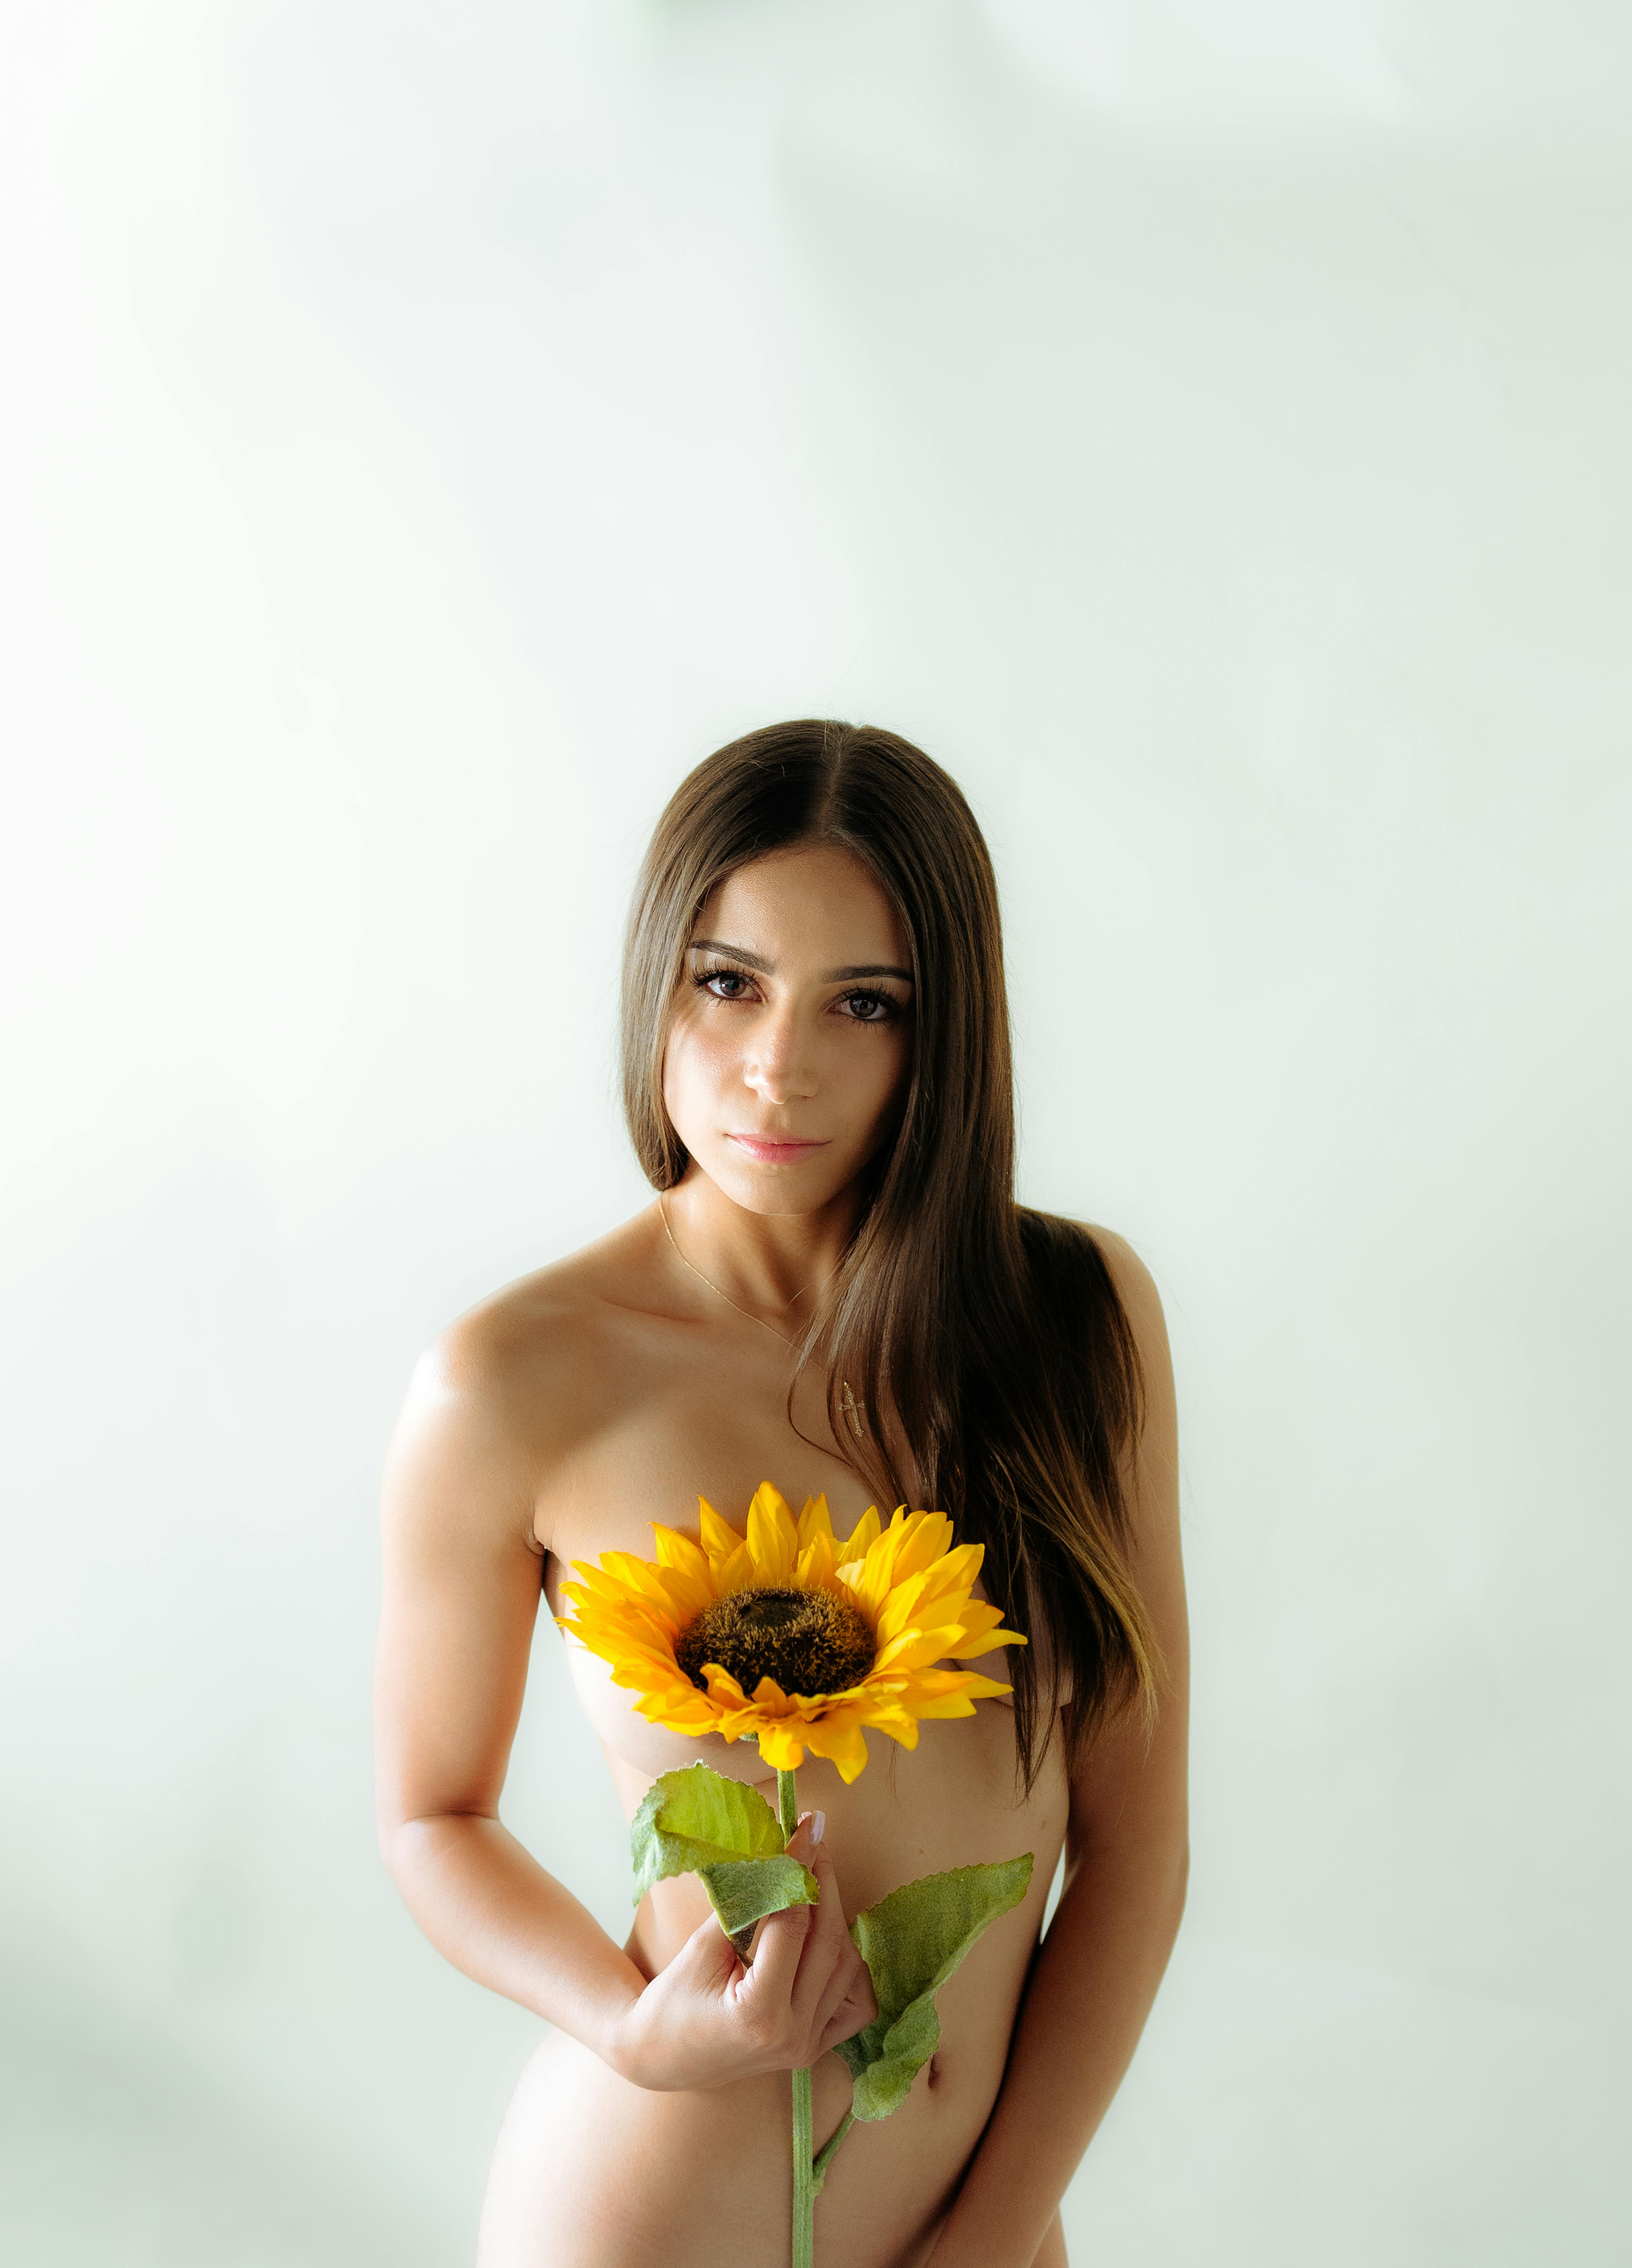 Naked Young Woman Holding a Sunflower · Free Stock Photo